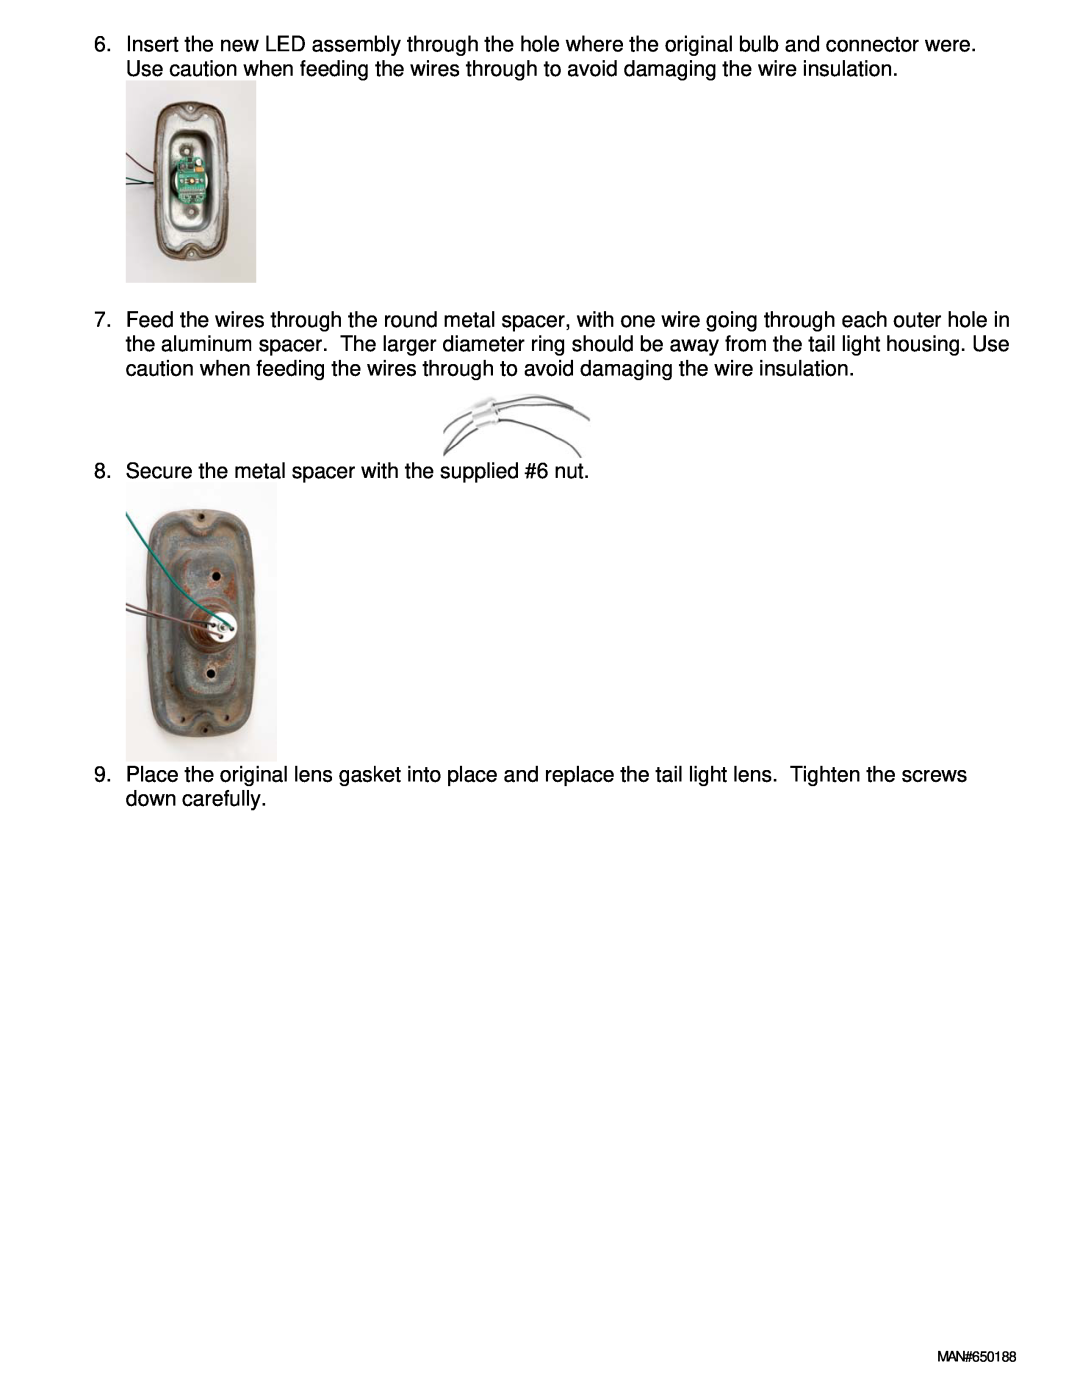 Dakota Digital LAT-NR230 installation instructions Secure the metal spacer with the supplied #6 nut 